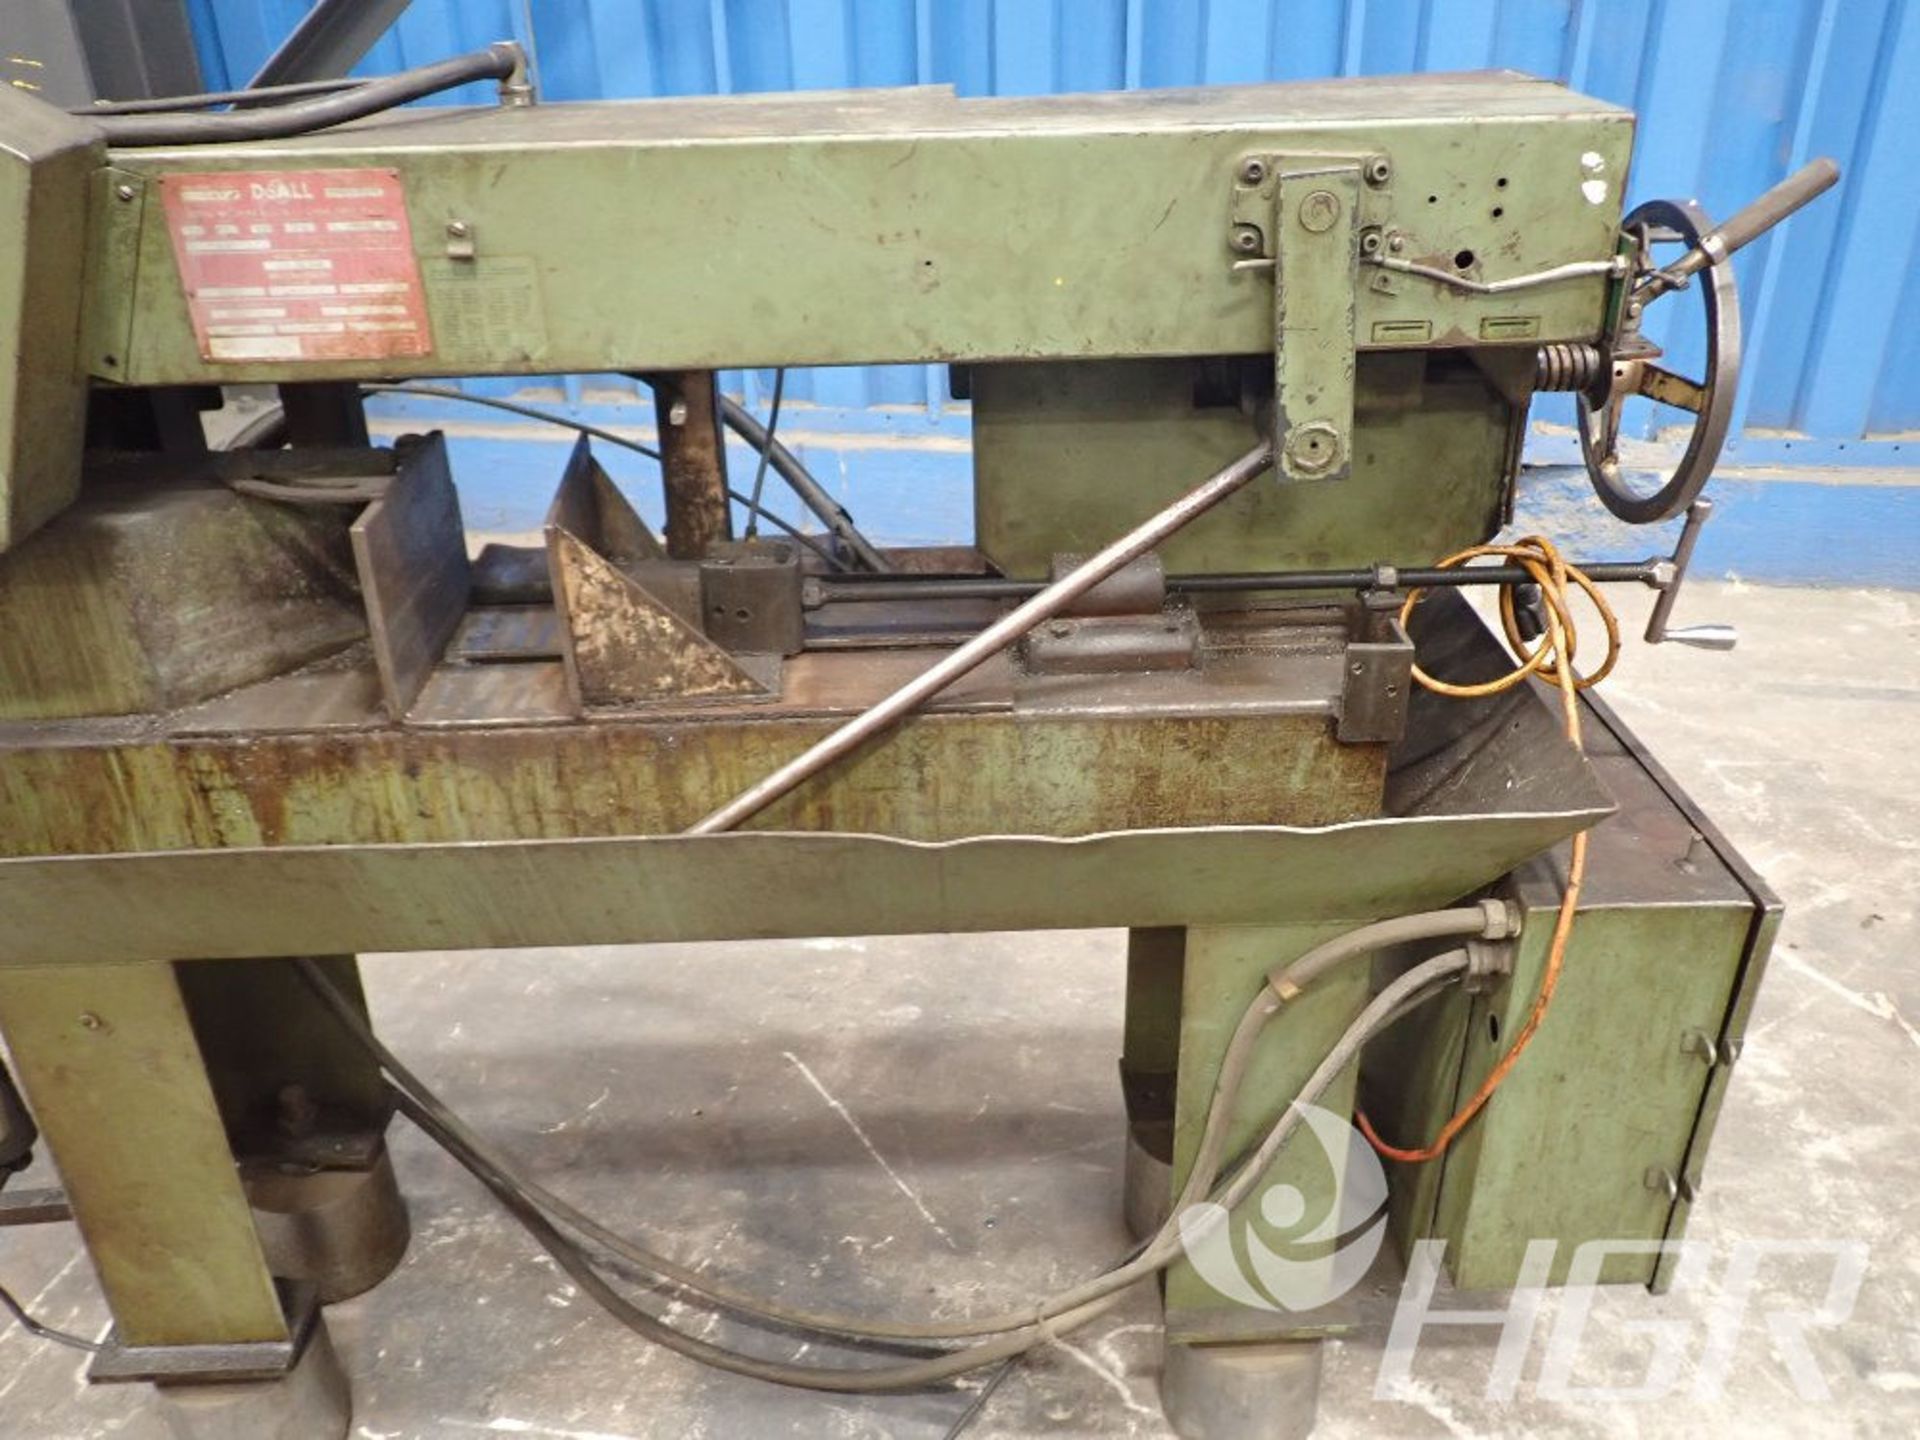 DO ALL HORIZONTAL BANDSAW, Model C-4, Date: n/a; s/n 234-773309, Approx. Capacity: 18", Power: 3/ - Image 8 of 19